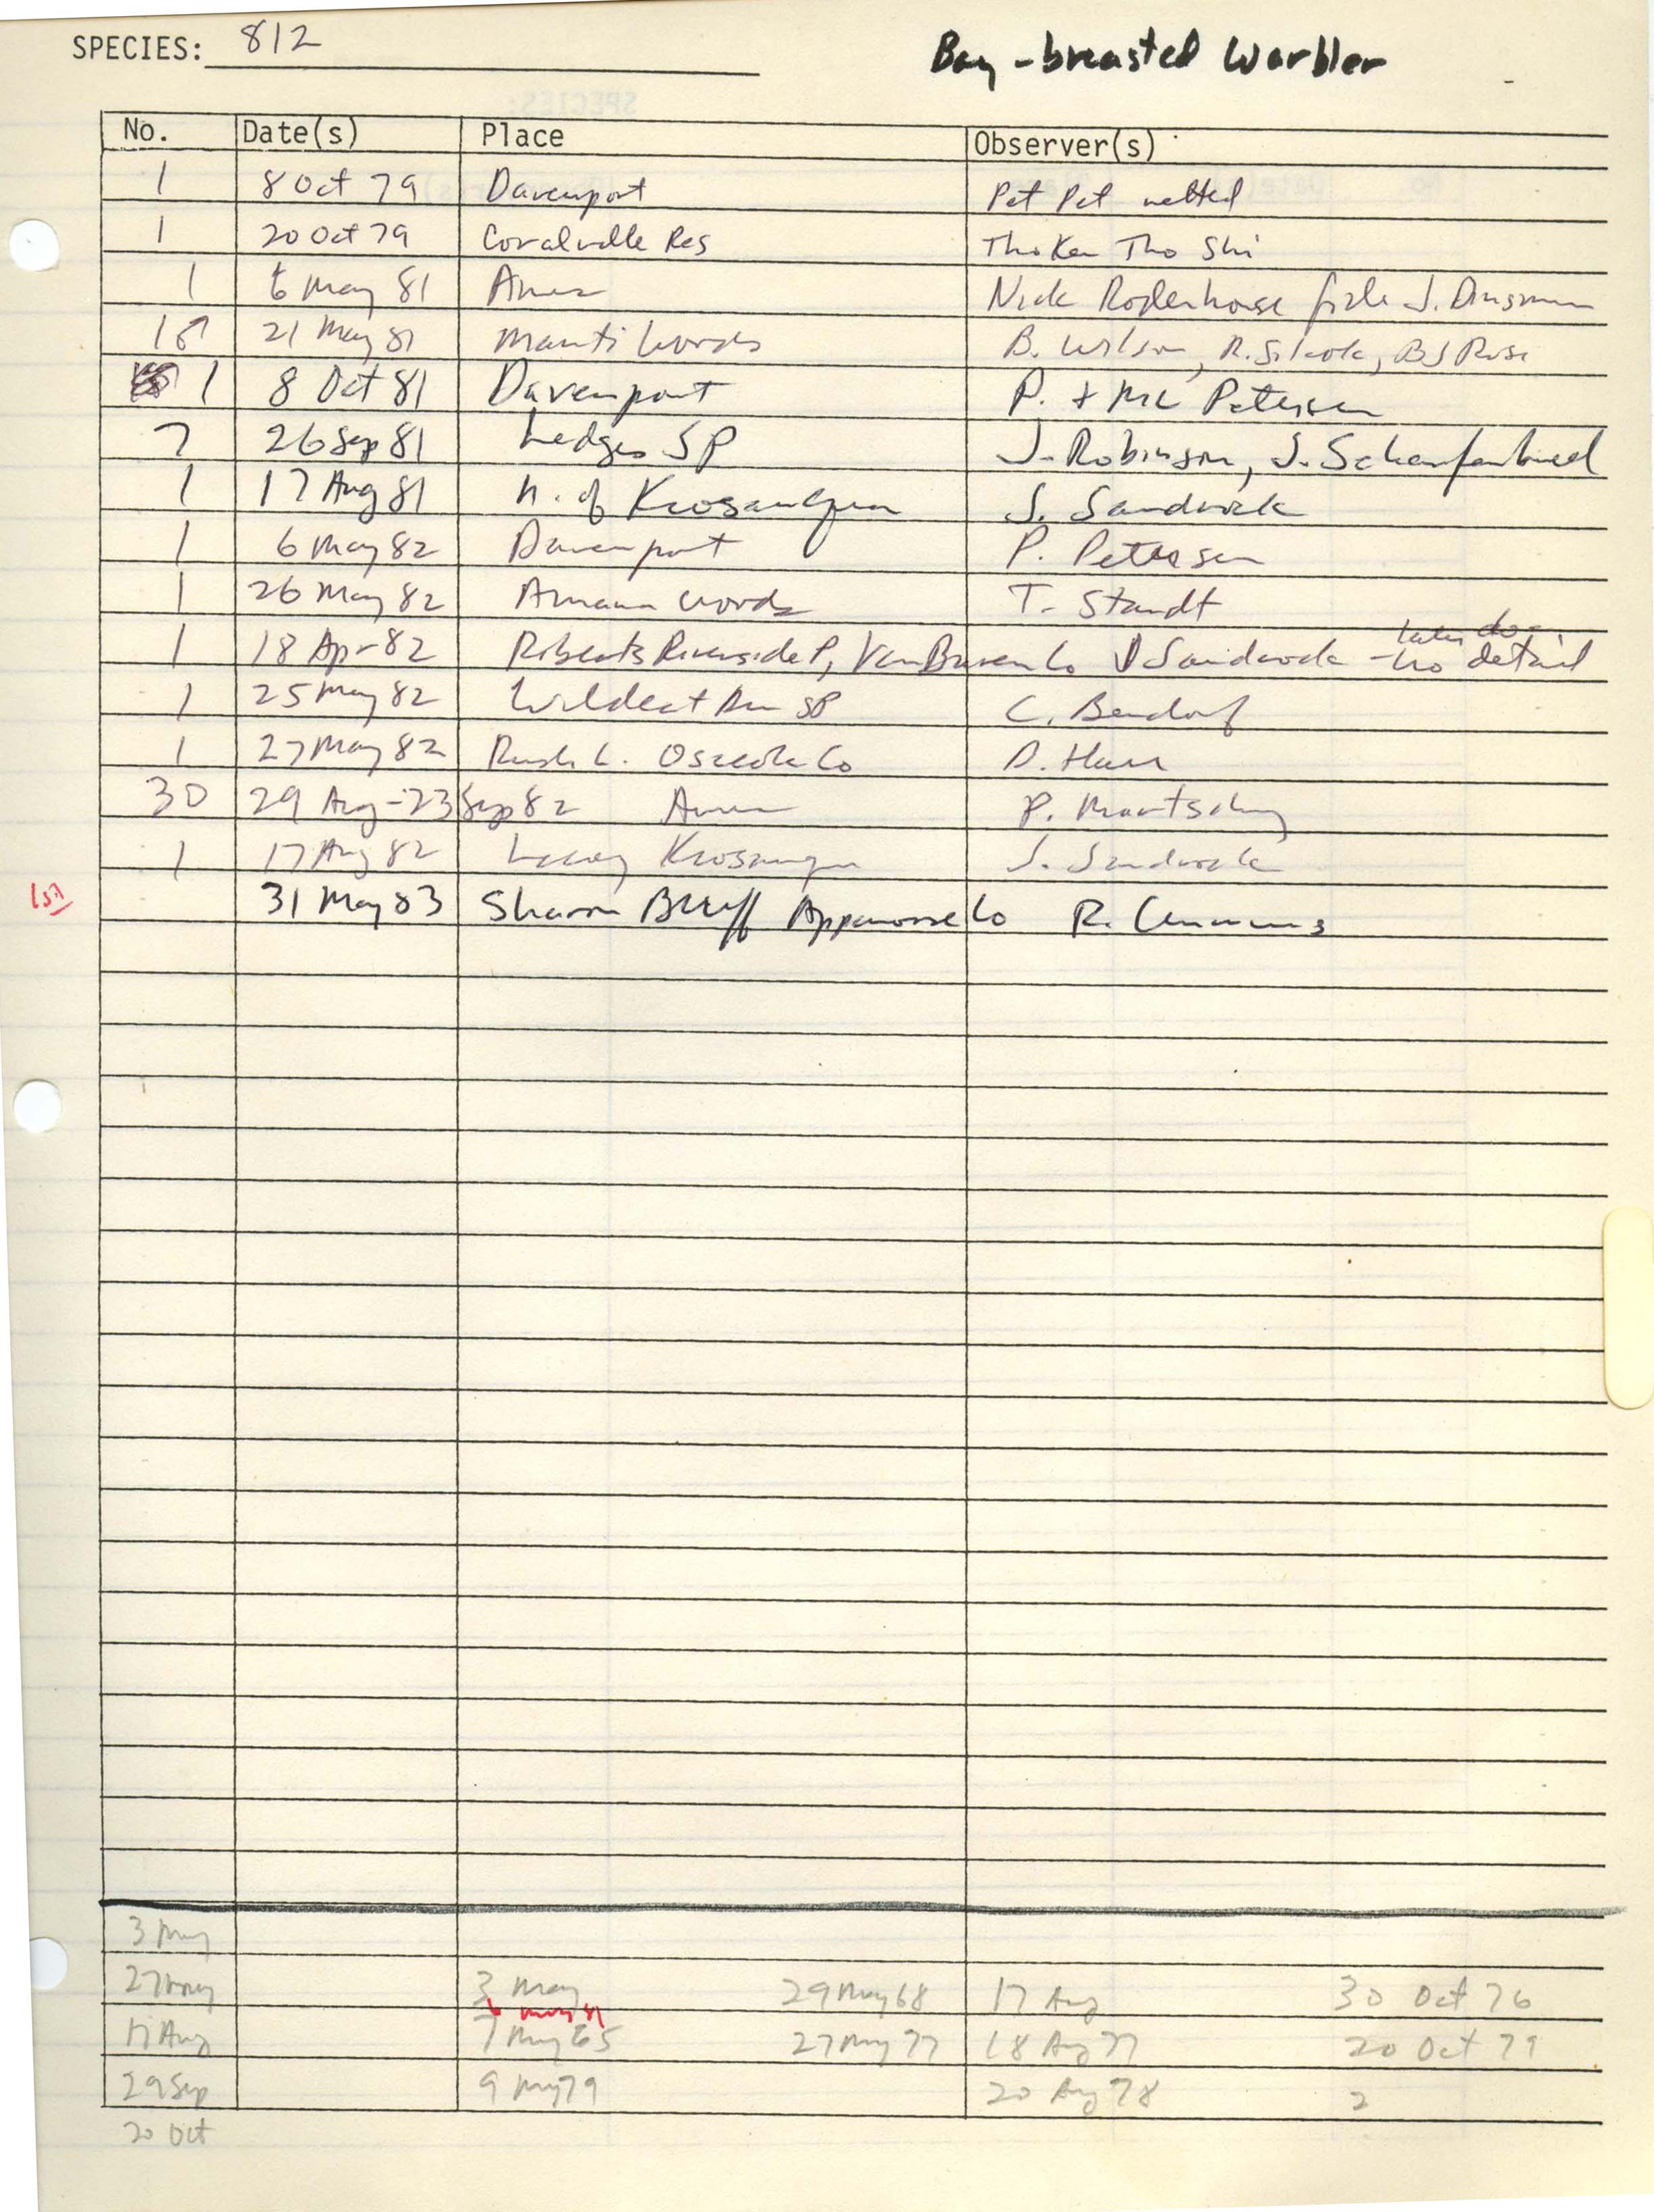 Iowa Ornithologists' Union, field report compiled data, Bay-breasted Warbler, 1979-1983